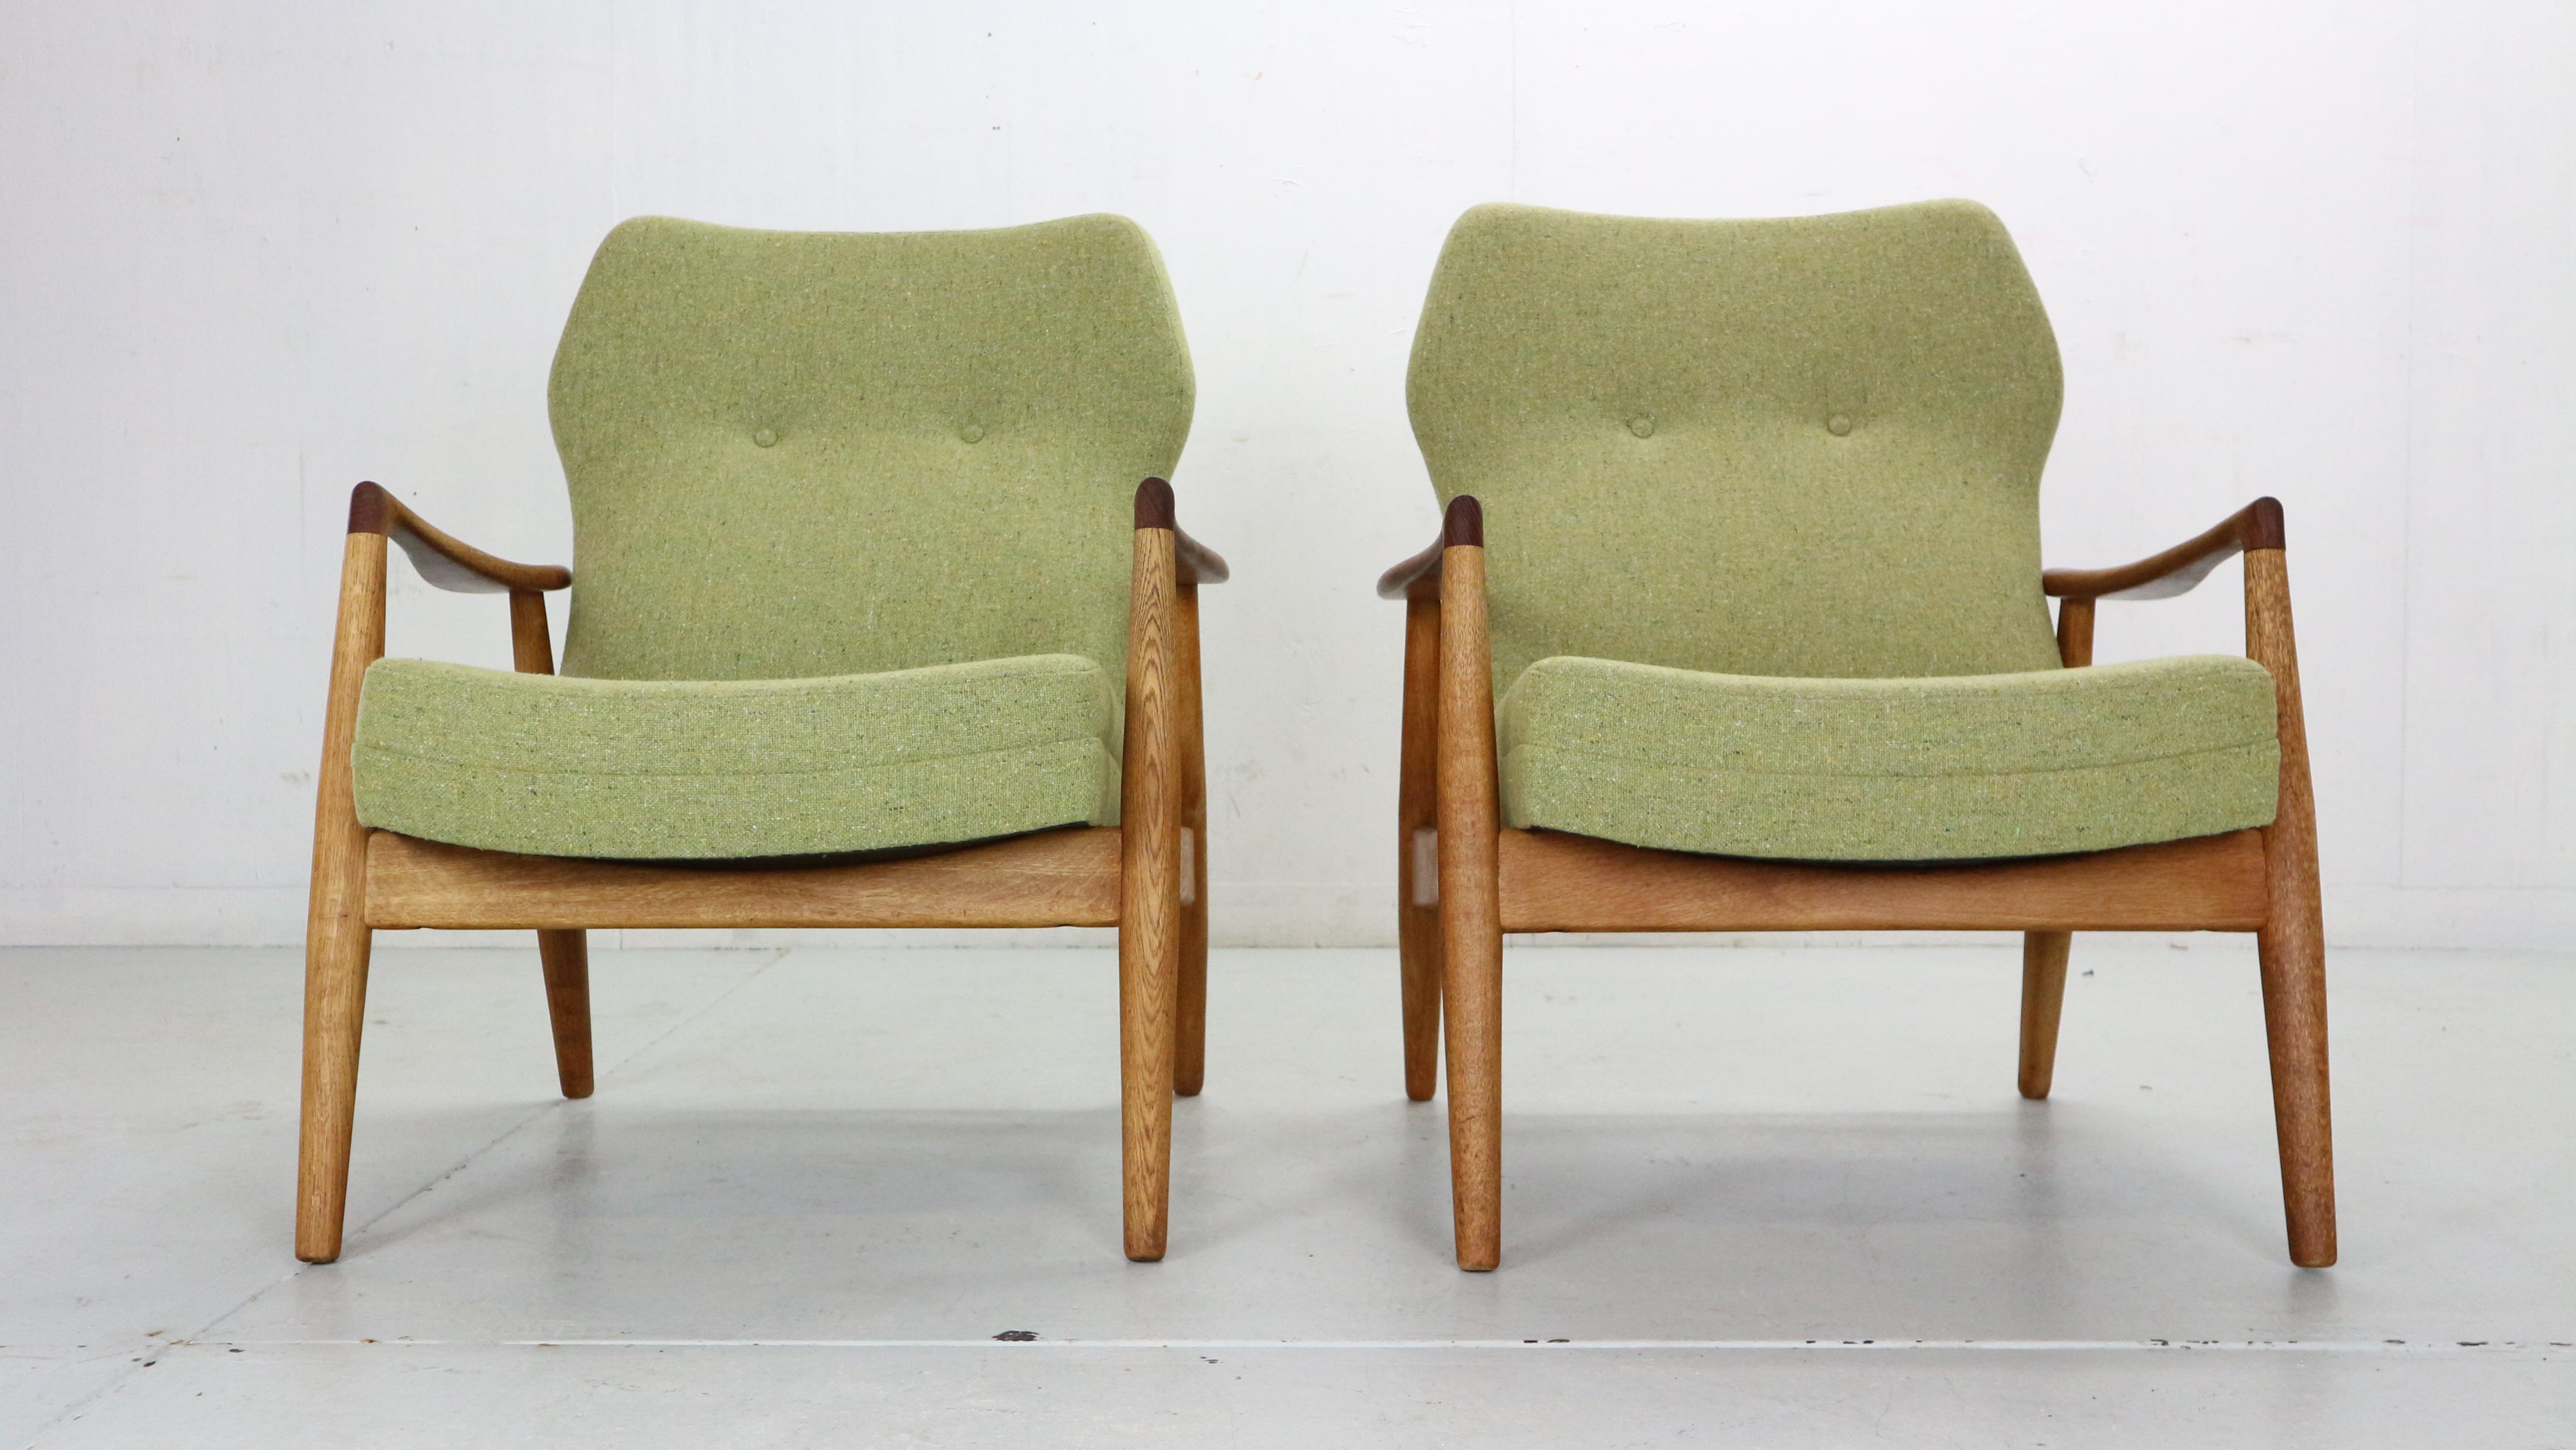 Set of 2 lounge chairs called wingback, designed by Aksel Bender Madsen. 

Aksel Bender Madsen worked for Bovenkamp in the 1950s and 1960s, this chair was produced in 1958. 
Madsen helped Bovenkamp to integrate Danish craftsmanship in their